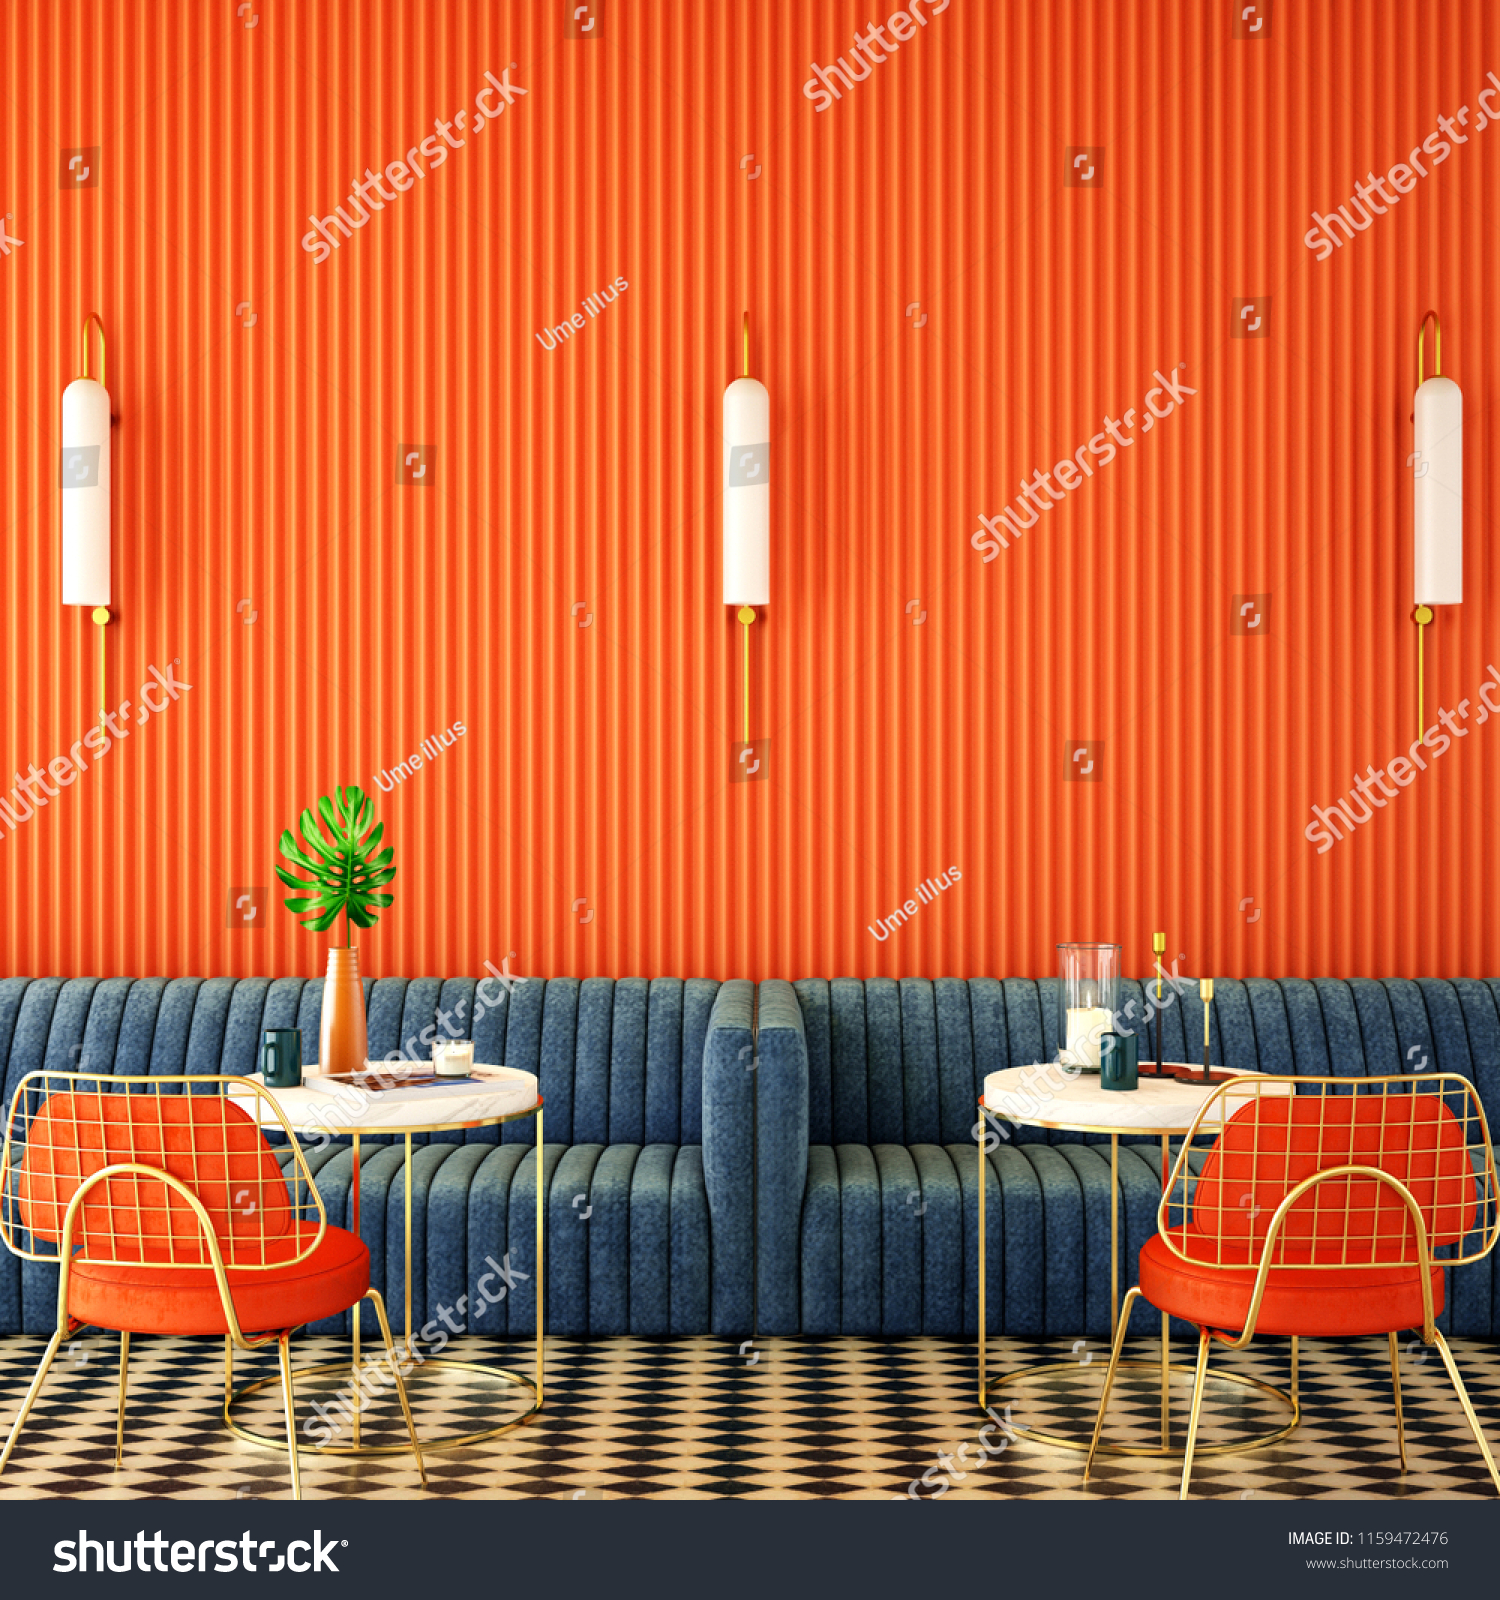 Cafe Interior Design About Complementary Color Stock